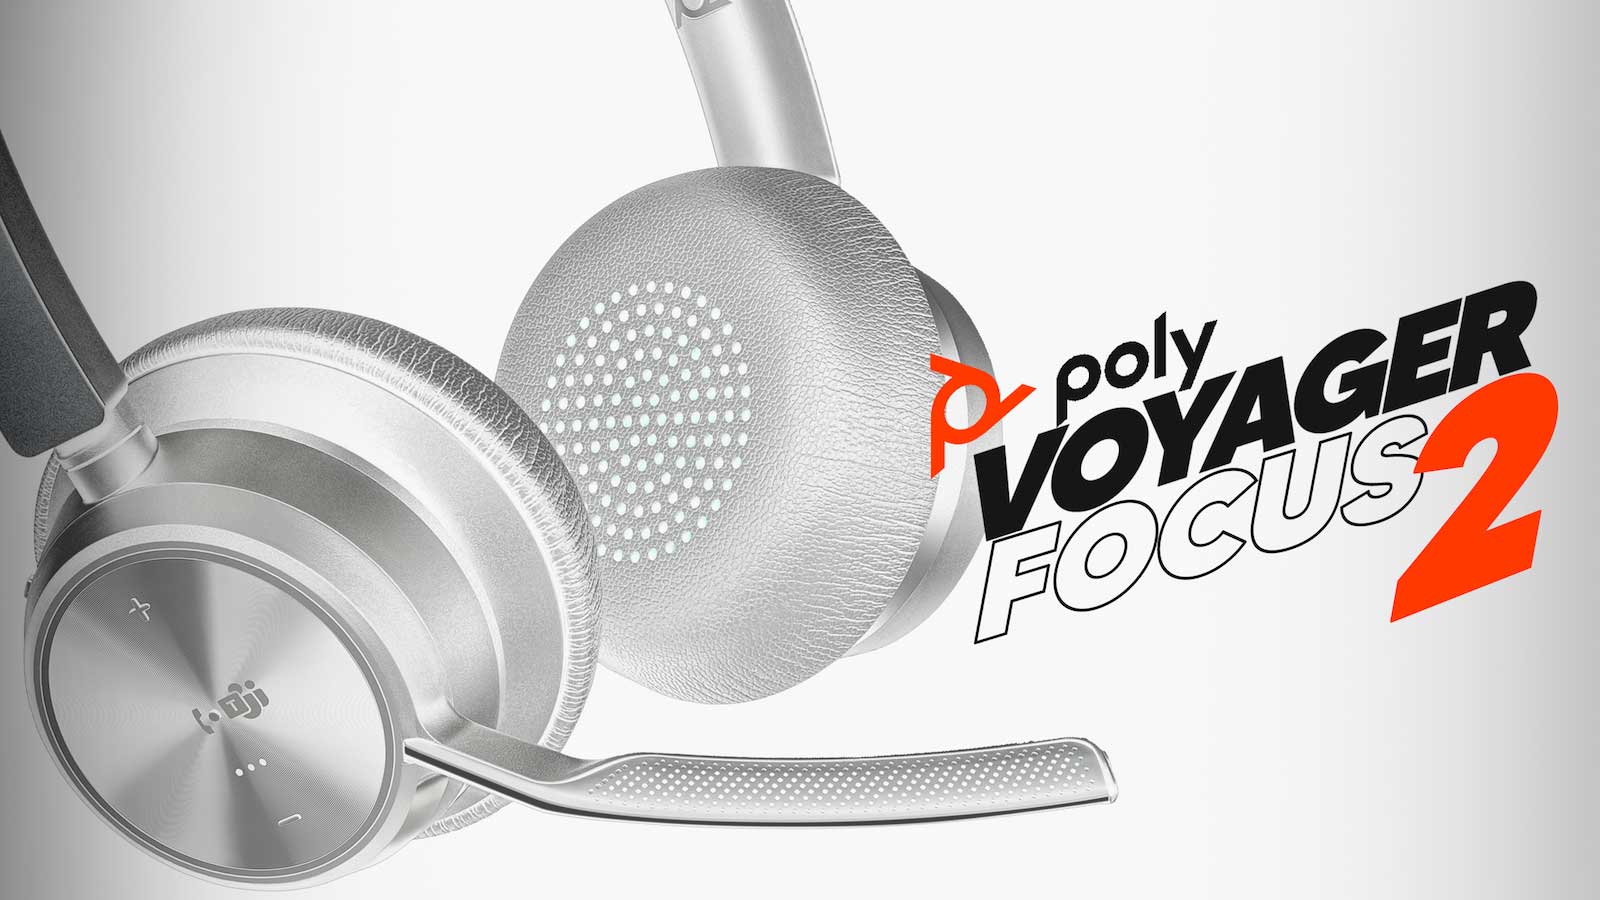 poly voyager focus 2 software download